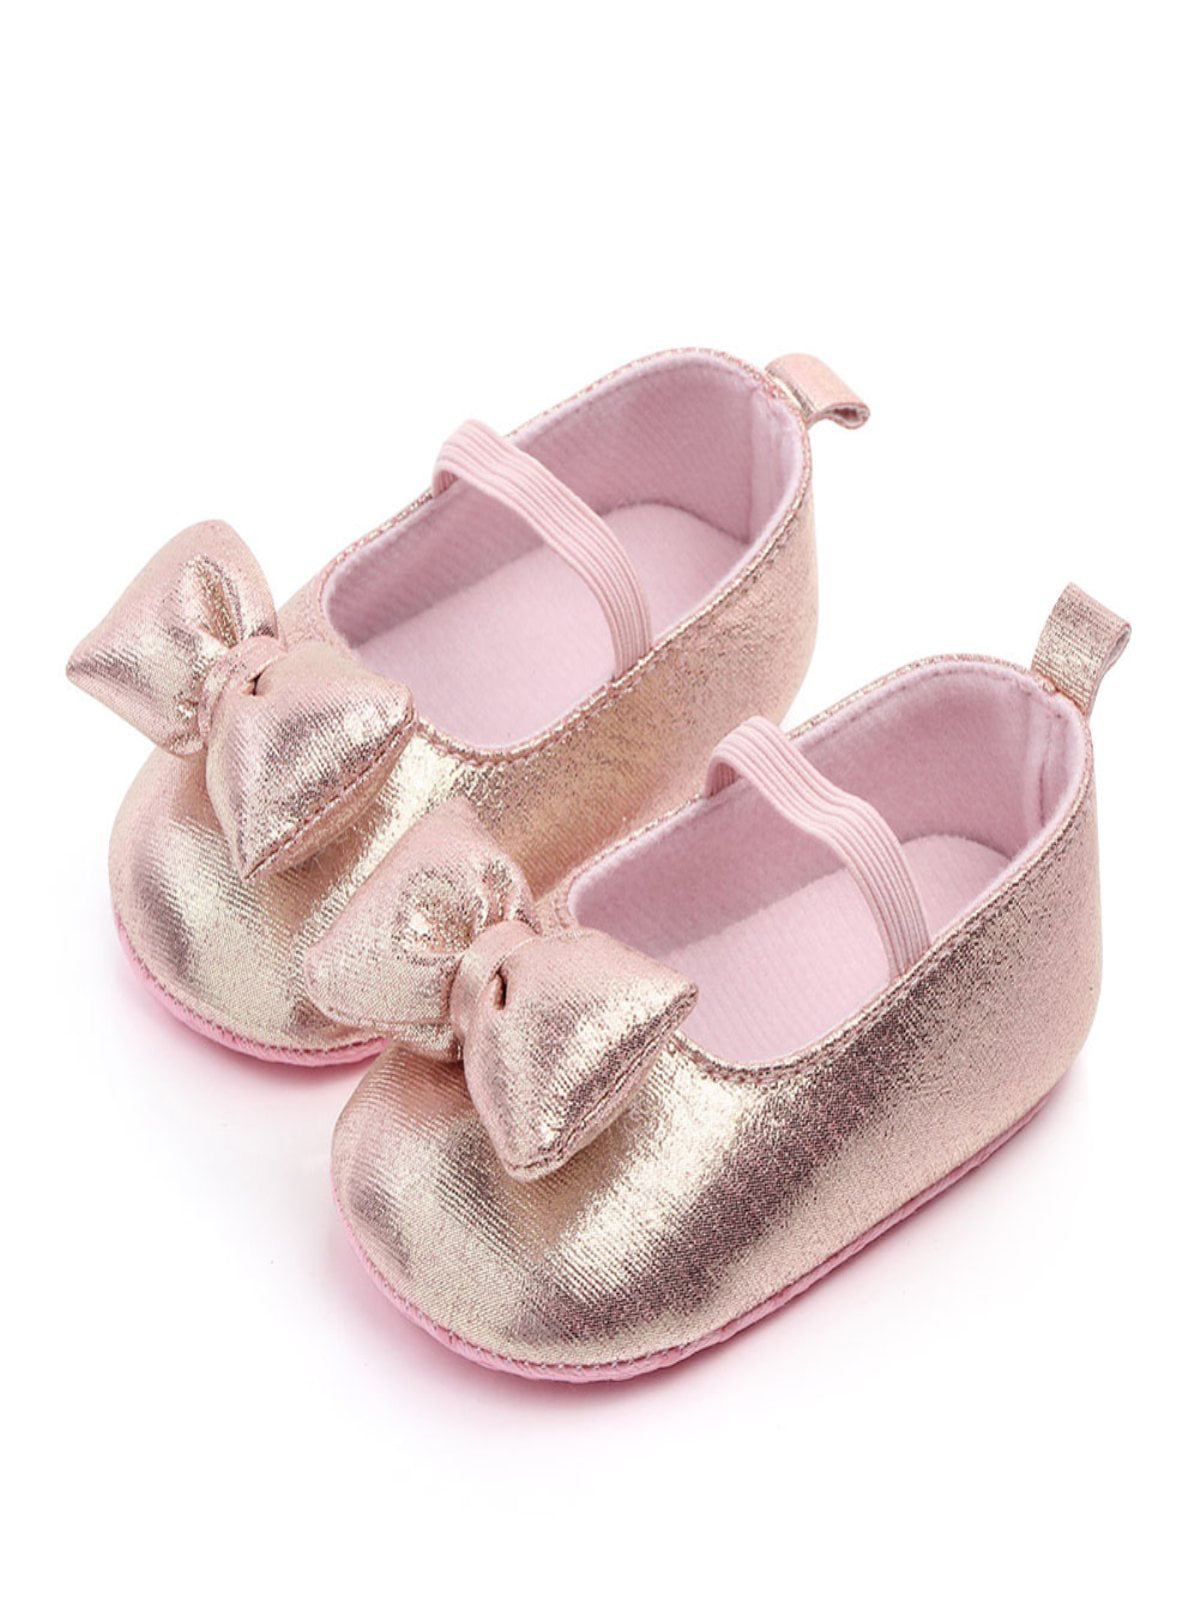 Toddler Baby Kids Girl Soft Sole Crib Shoes Sequins Flat Sneaker Soft Sole Shoes 